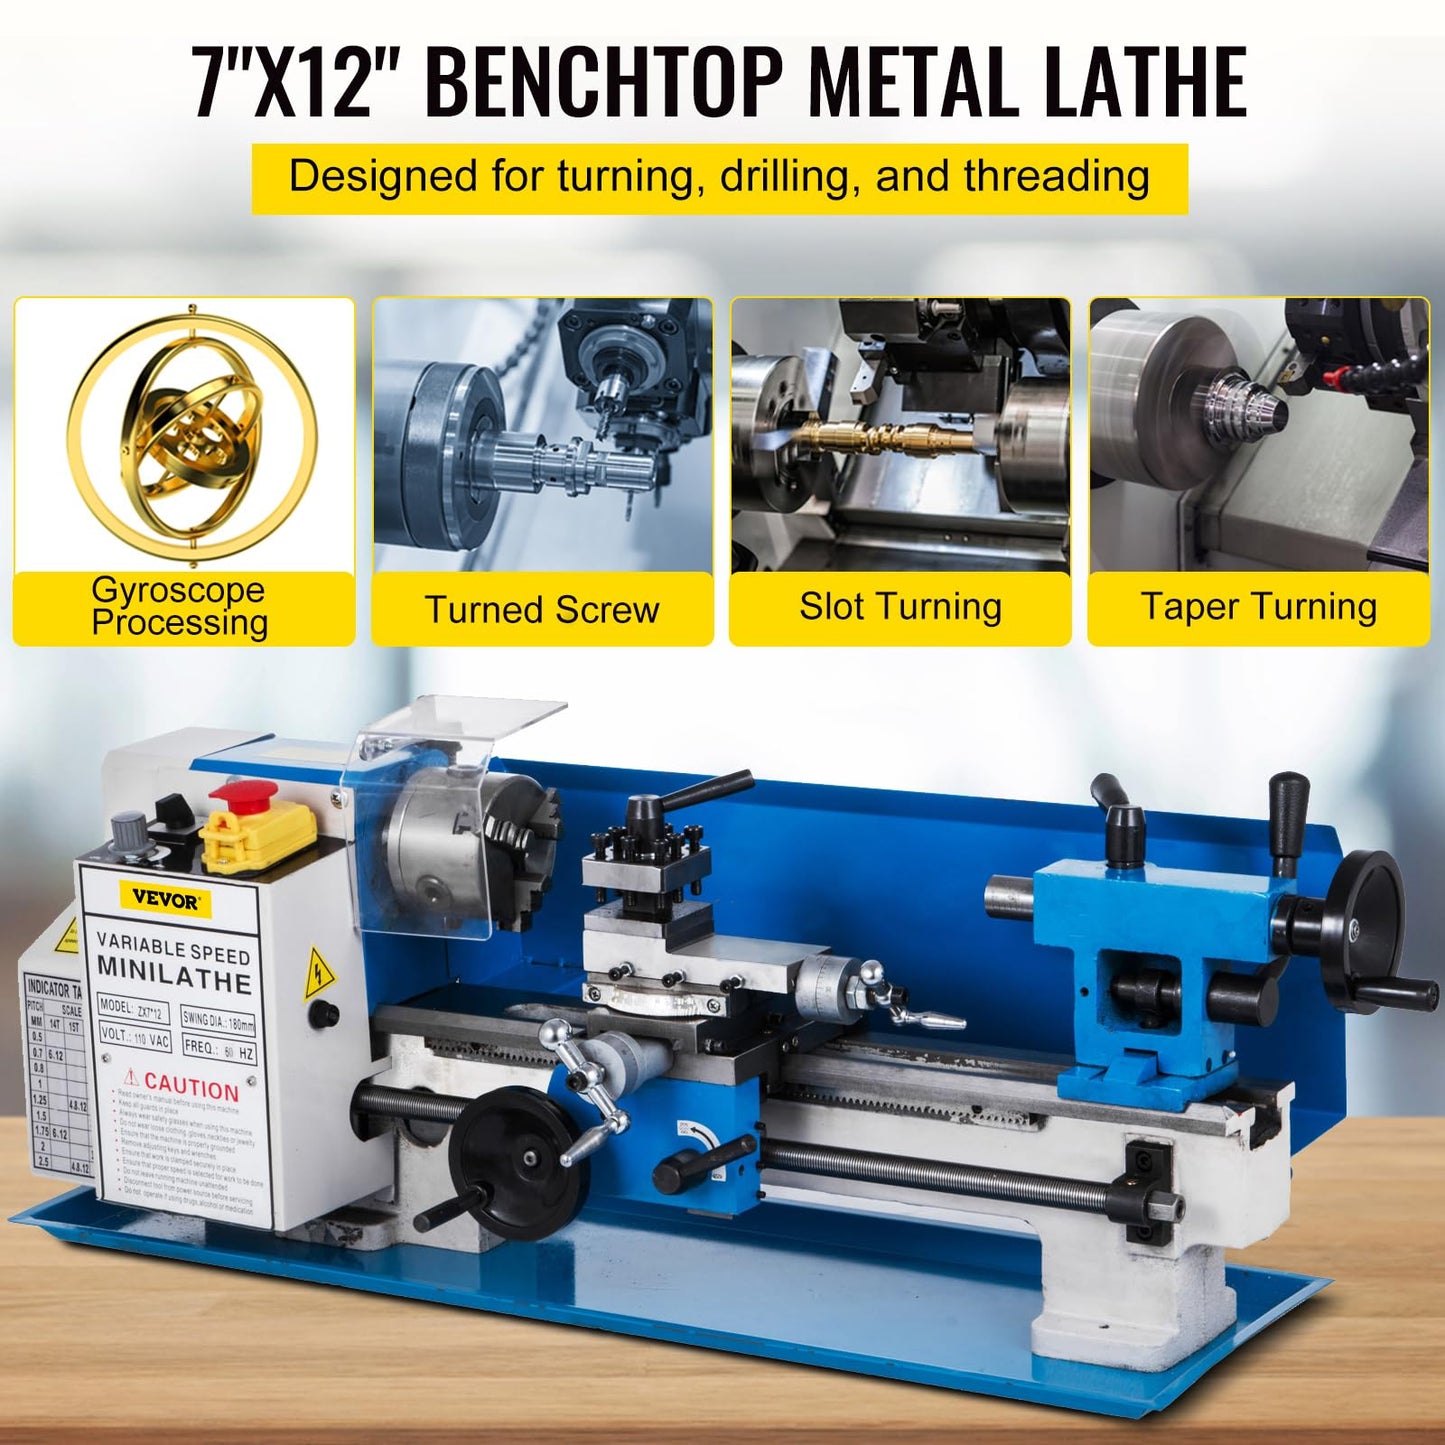 VEVOR Metal Lathe 7"x12",Precision Bench Top Mini Metal Lathe 550W, Metal Lathe Variable Speed 50-2500 RPM Nylon Gear With A Movable Lamp for